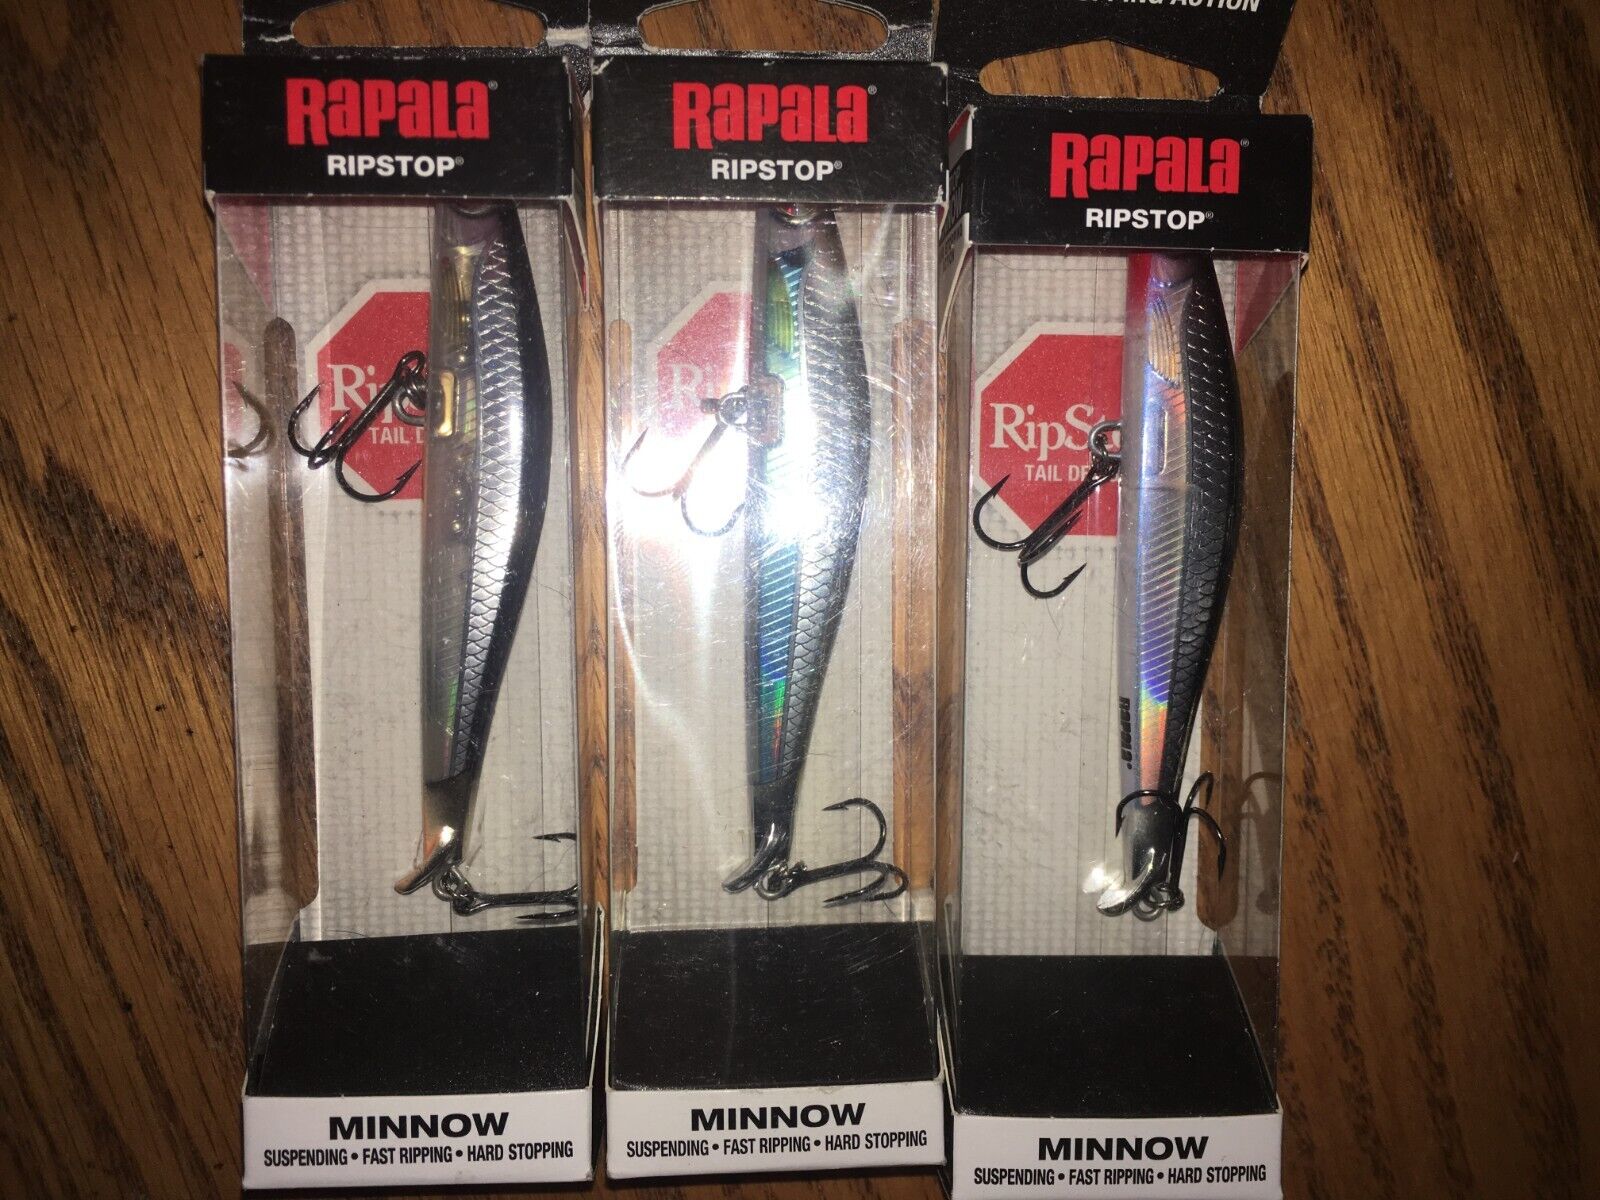 RAPALA RIP STOP 09's==3 DIFFERENT COLORED FISHING LURES